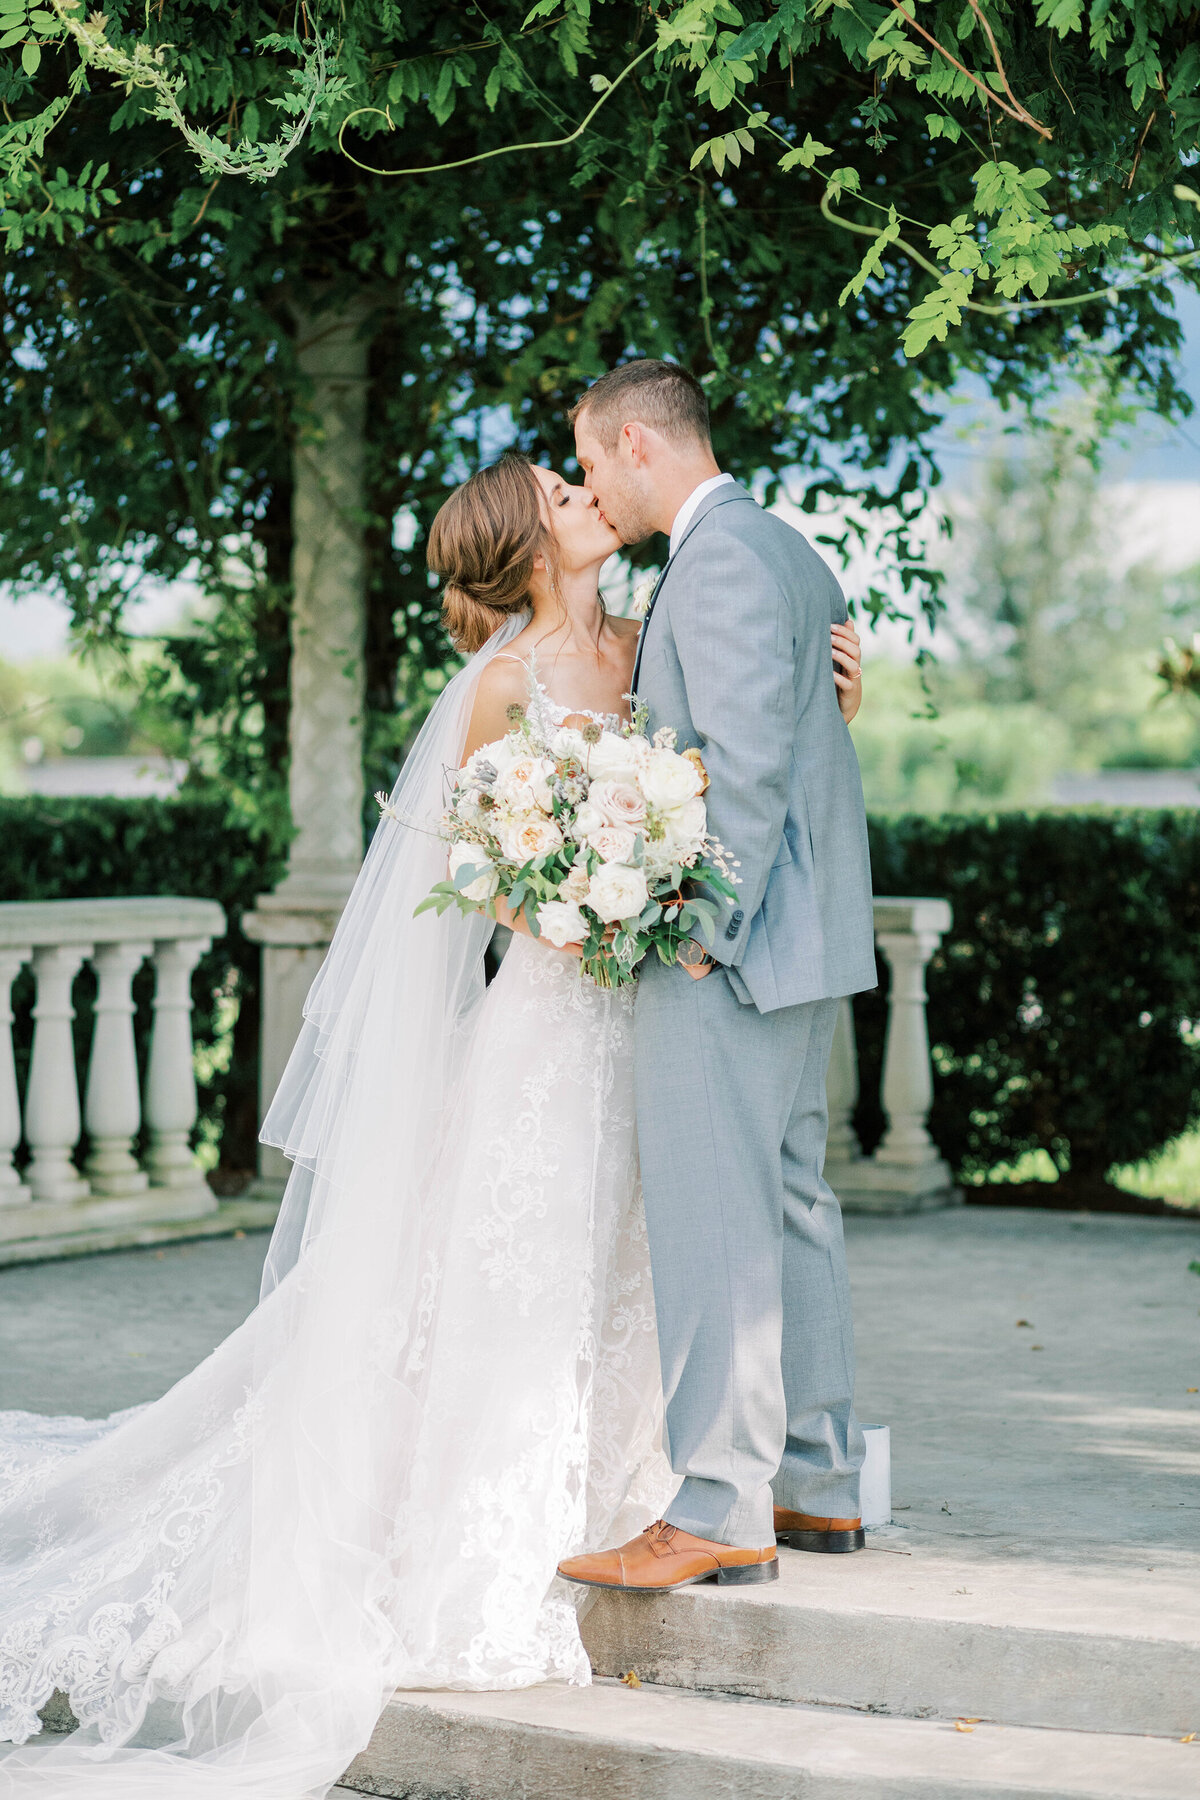 Ink & Willow Photography - Wedding Photographers Victoria TX - Kyle + Westy - ink&willow-B&G-25